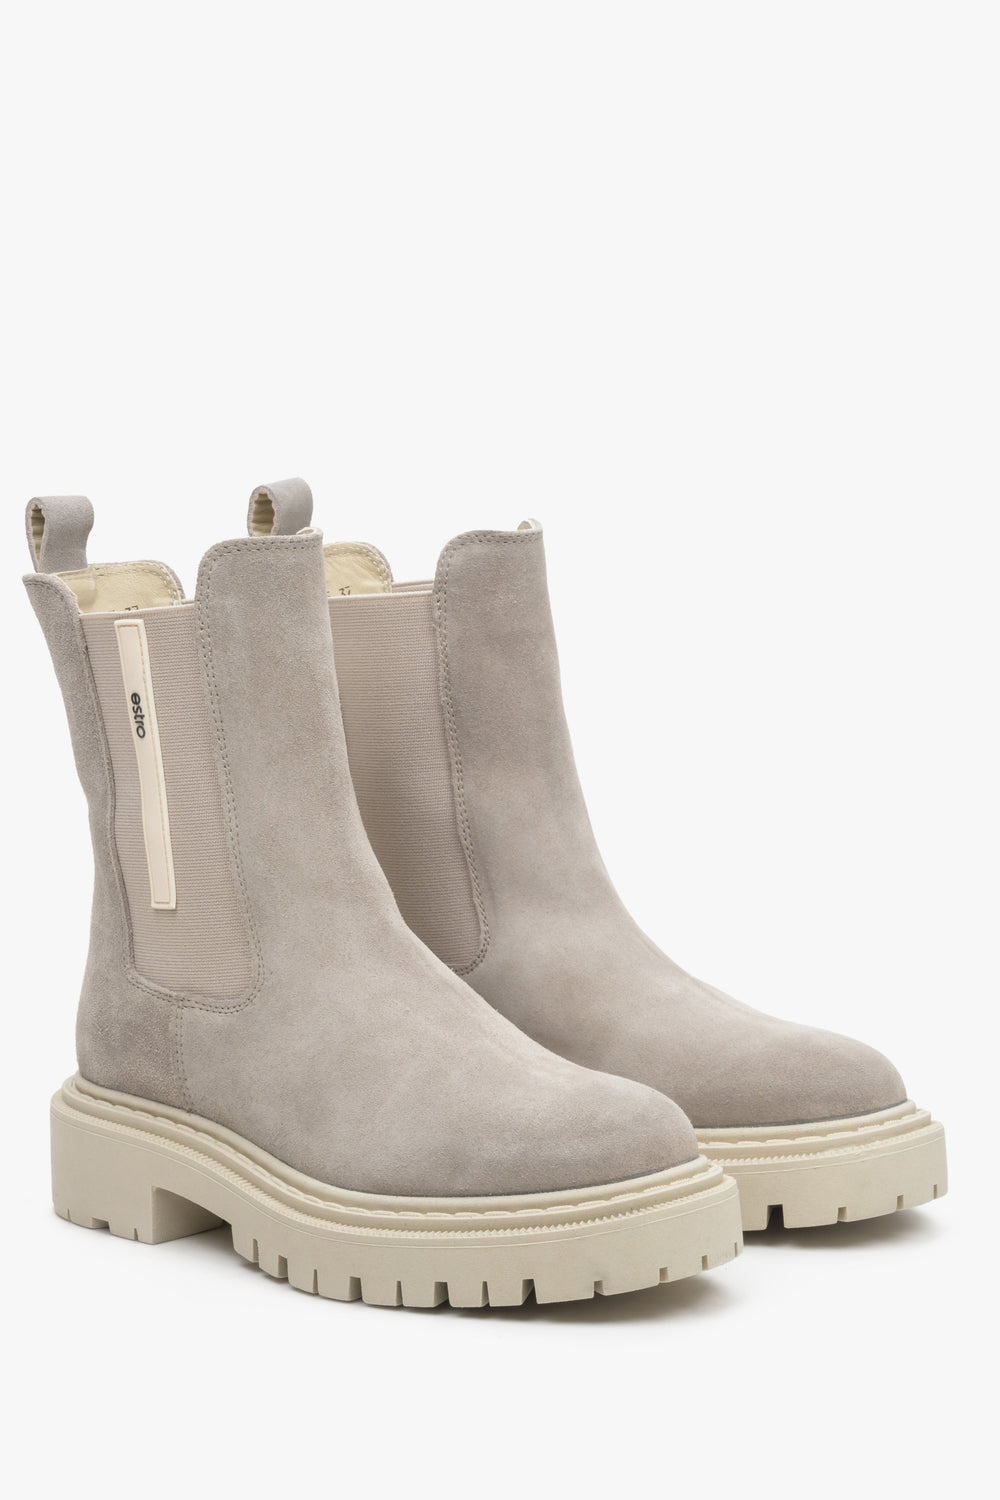 Women's suede chelsea boot in grey, chunky sole.